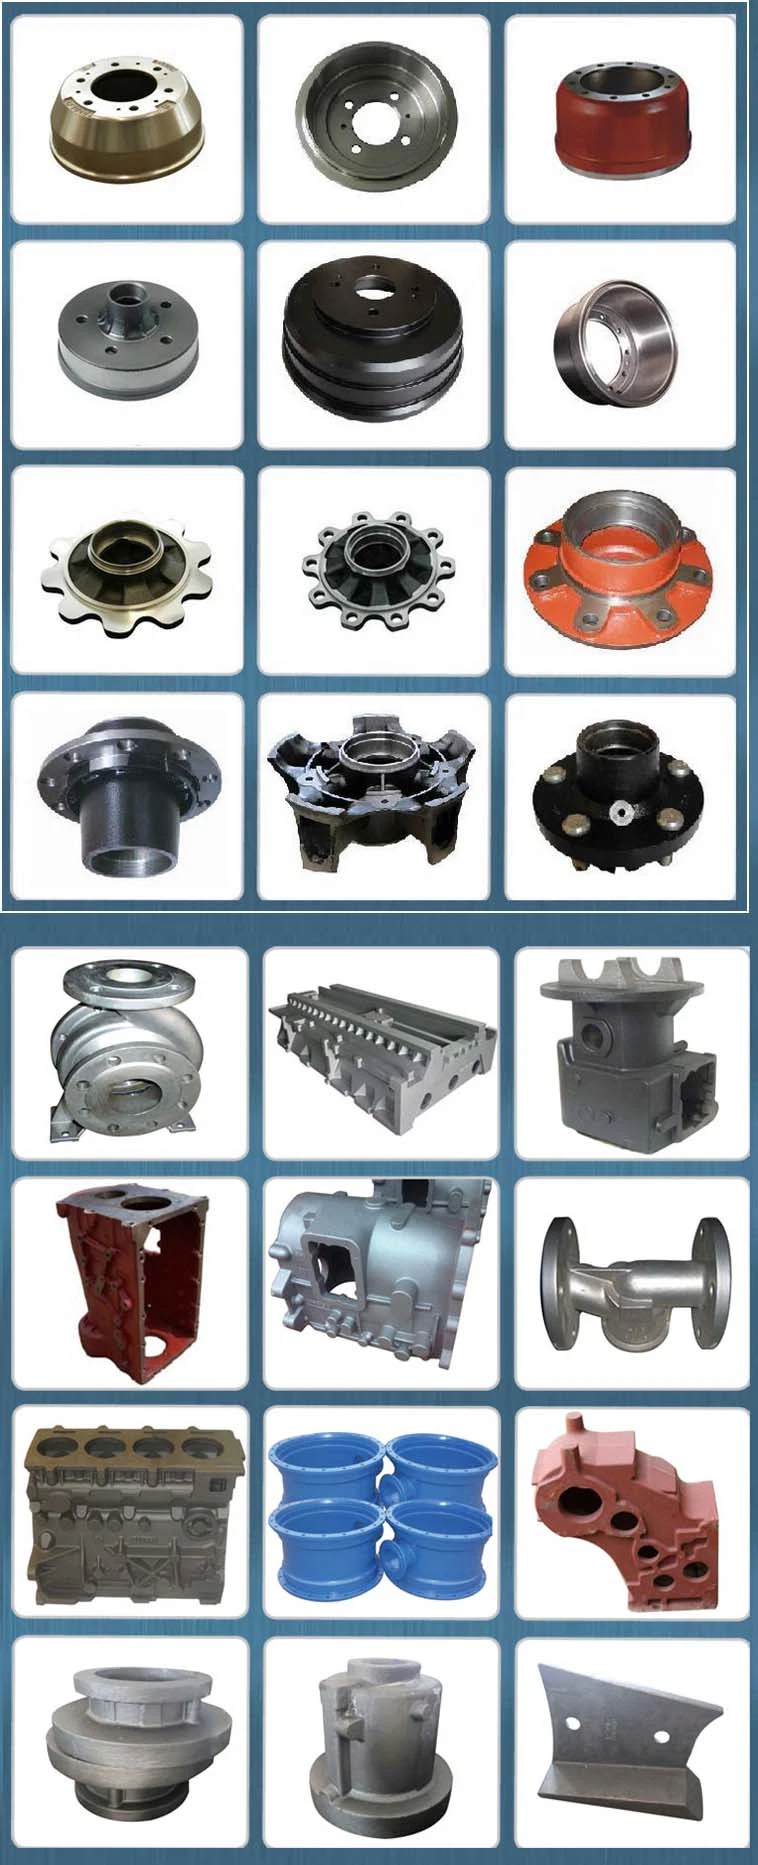 Wheel Hub of Auto Parts, Used for BPW, Daf, with 8 and 10 Holes, Comes in Gray Iron and Ductile Sand Casting